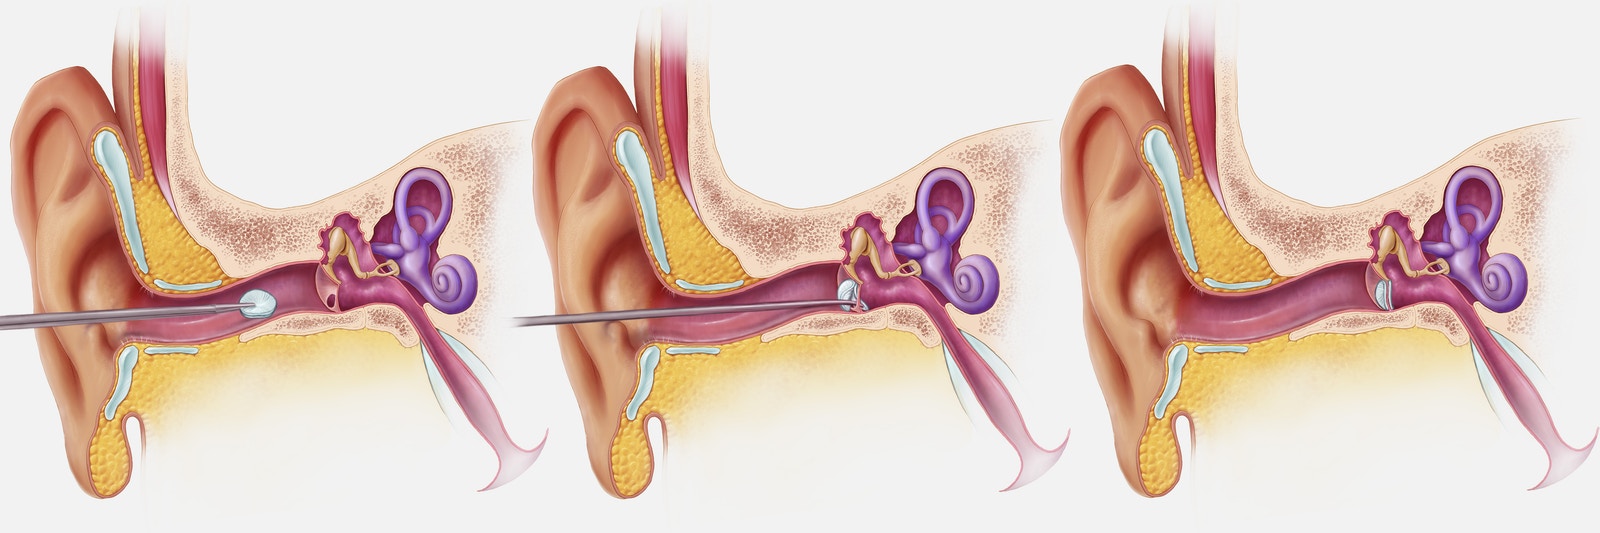 The noninvasive process by which the PhonoGraft is installed through the ear canal. Image via Shawna Snyder / Wyss Institute.